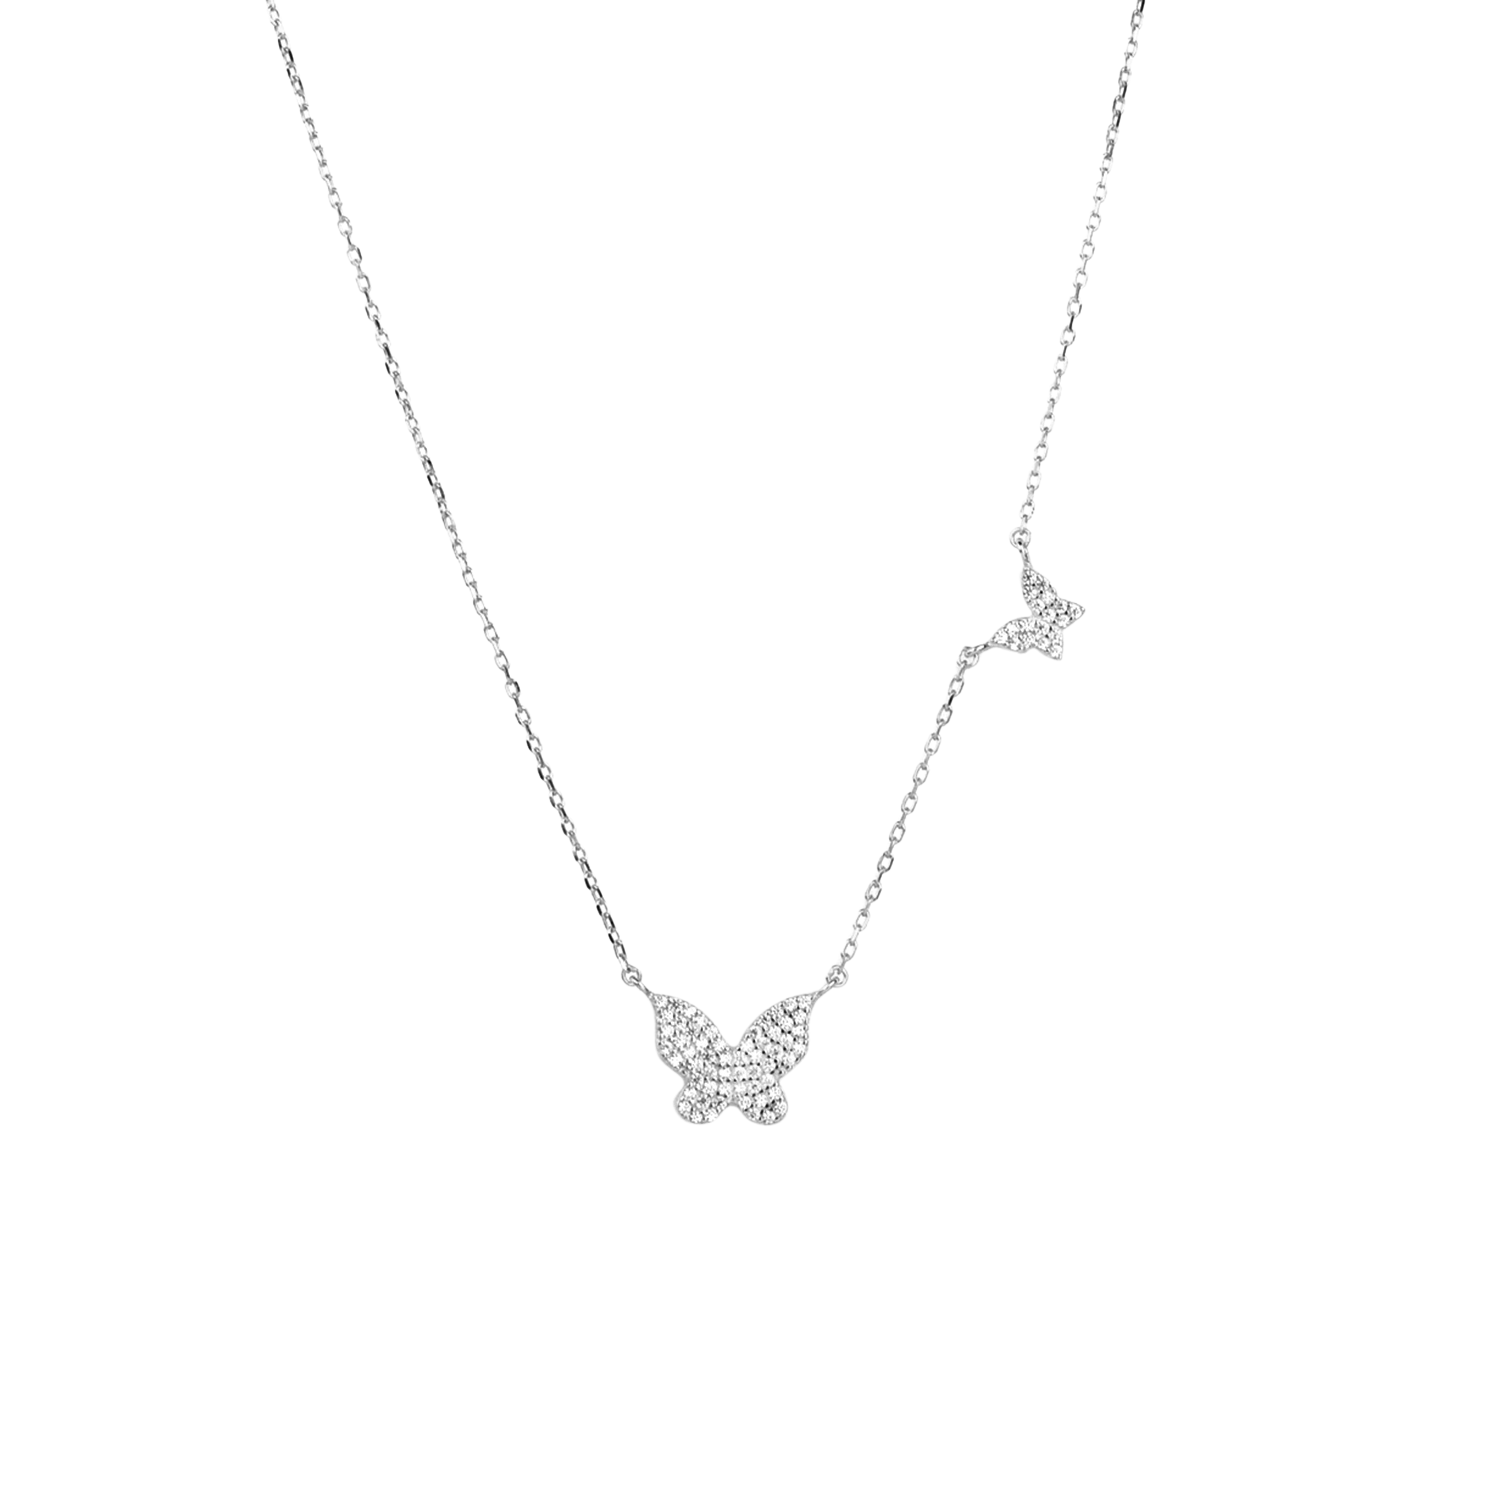 Silver White Butterfly Pendant Necklace | Classy Women Collection